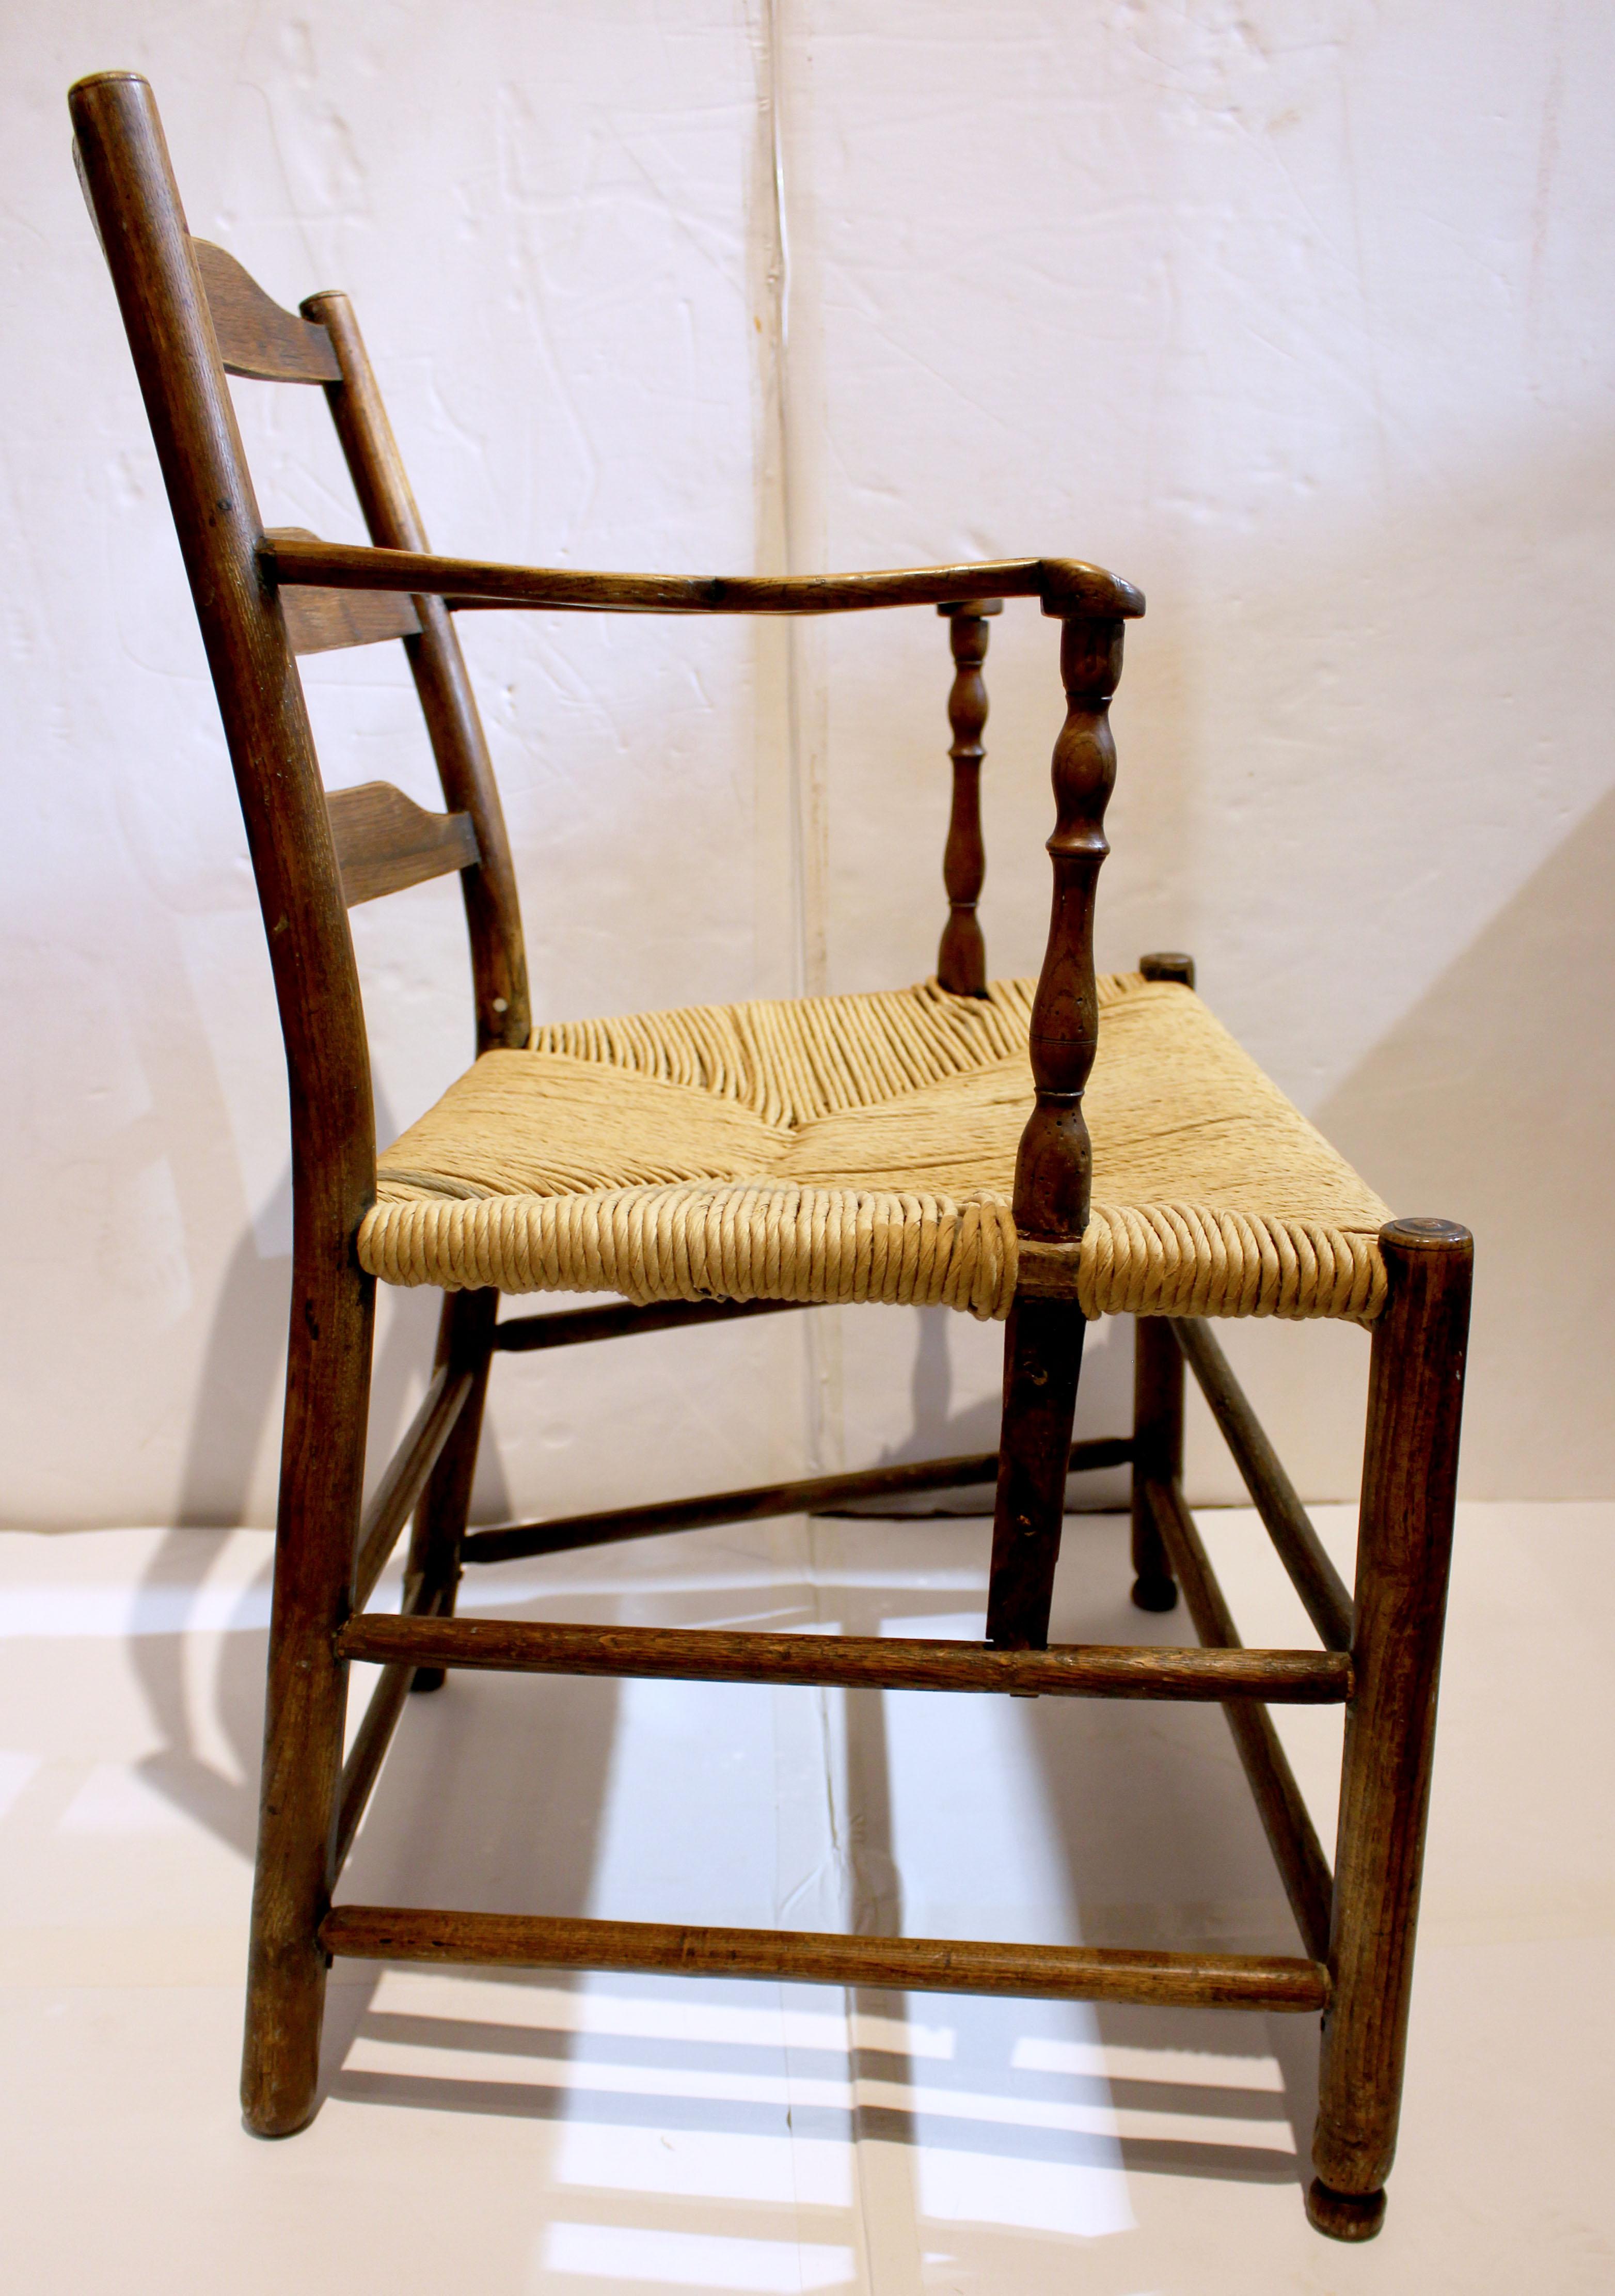 Early 19th century country French ladder-back arm chair. Robust form, graduated ladder-back rails with charming returns & shaping of the arms. Vasiform arm supports. Turned legs & stretchers. Made of ash wood, with old rush seat.
23.5